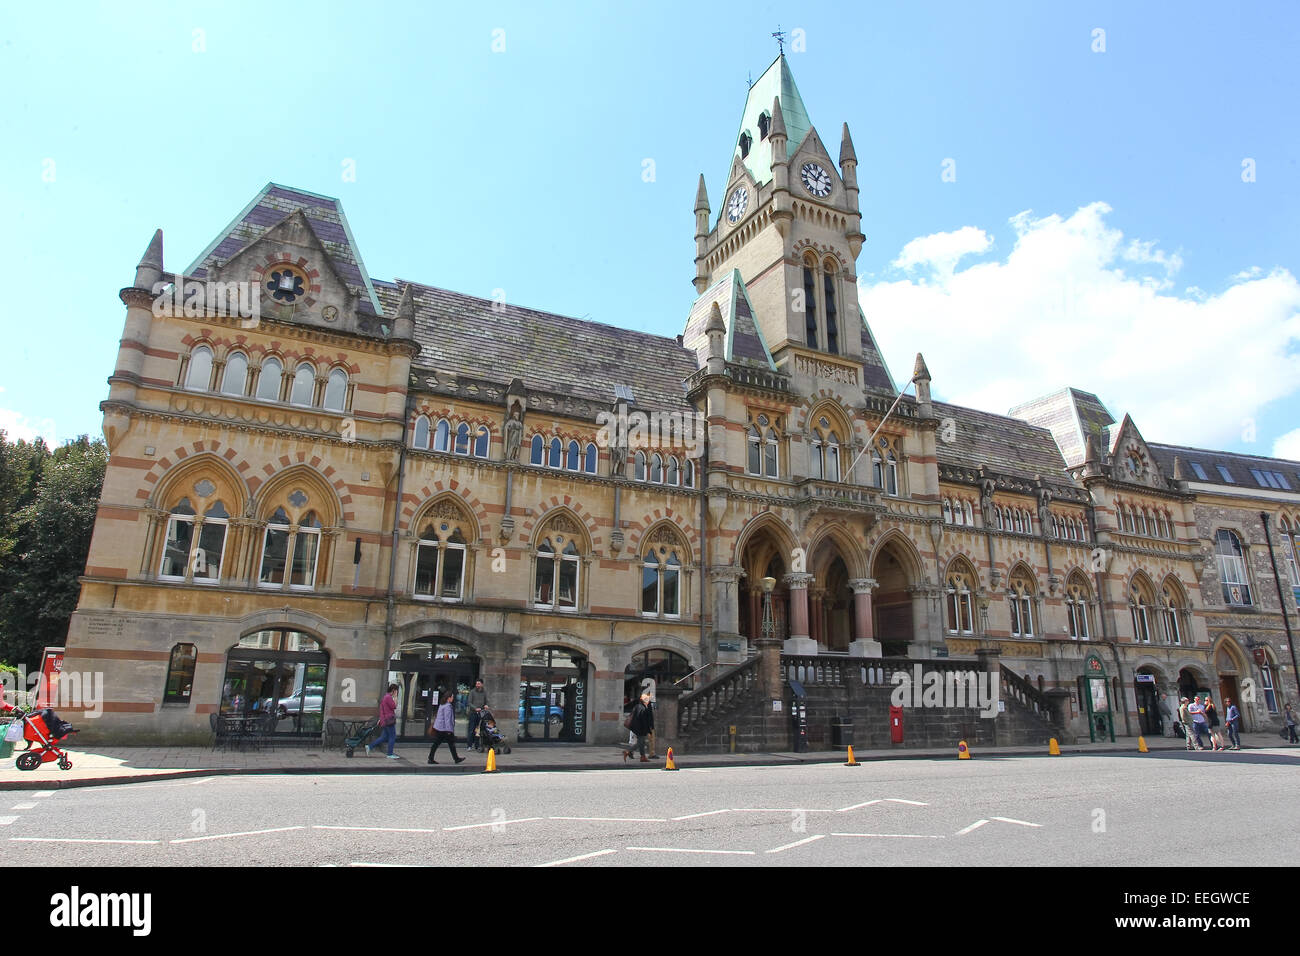 La Guildhall Winchester, Hampshire, Angleterre Banque D'Images